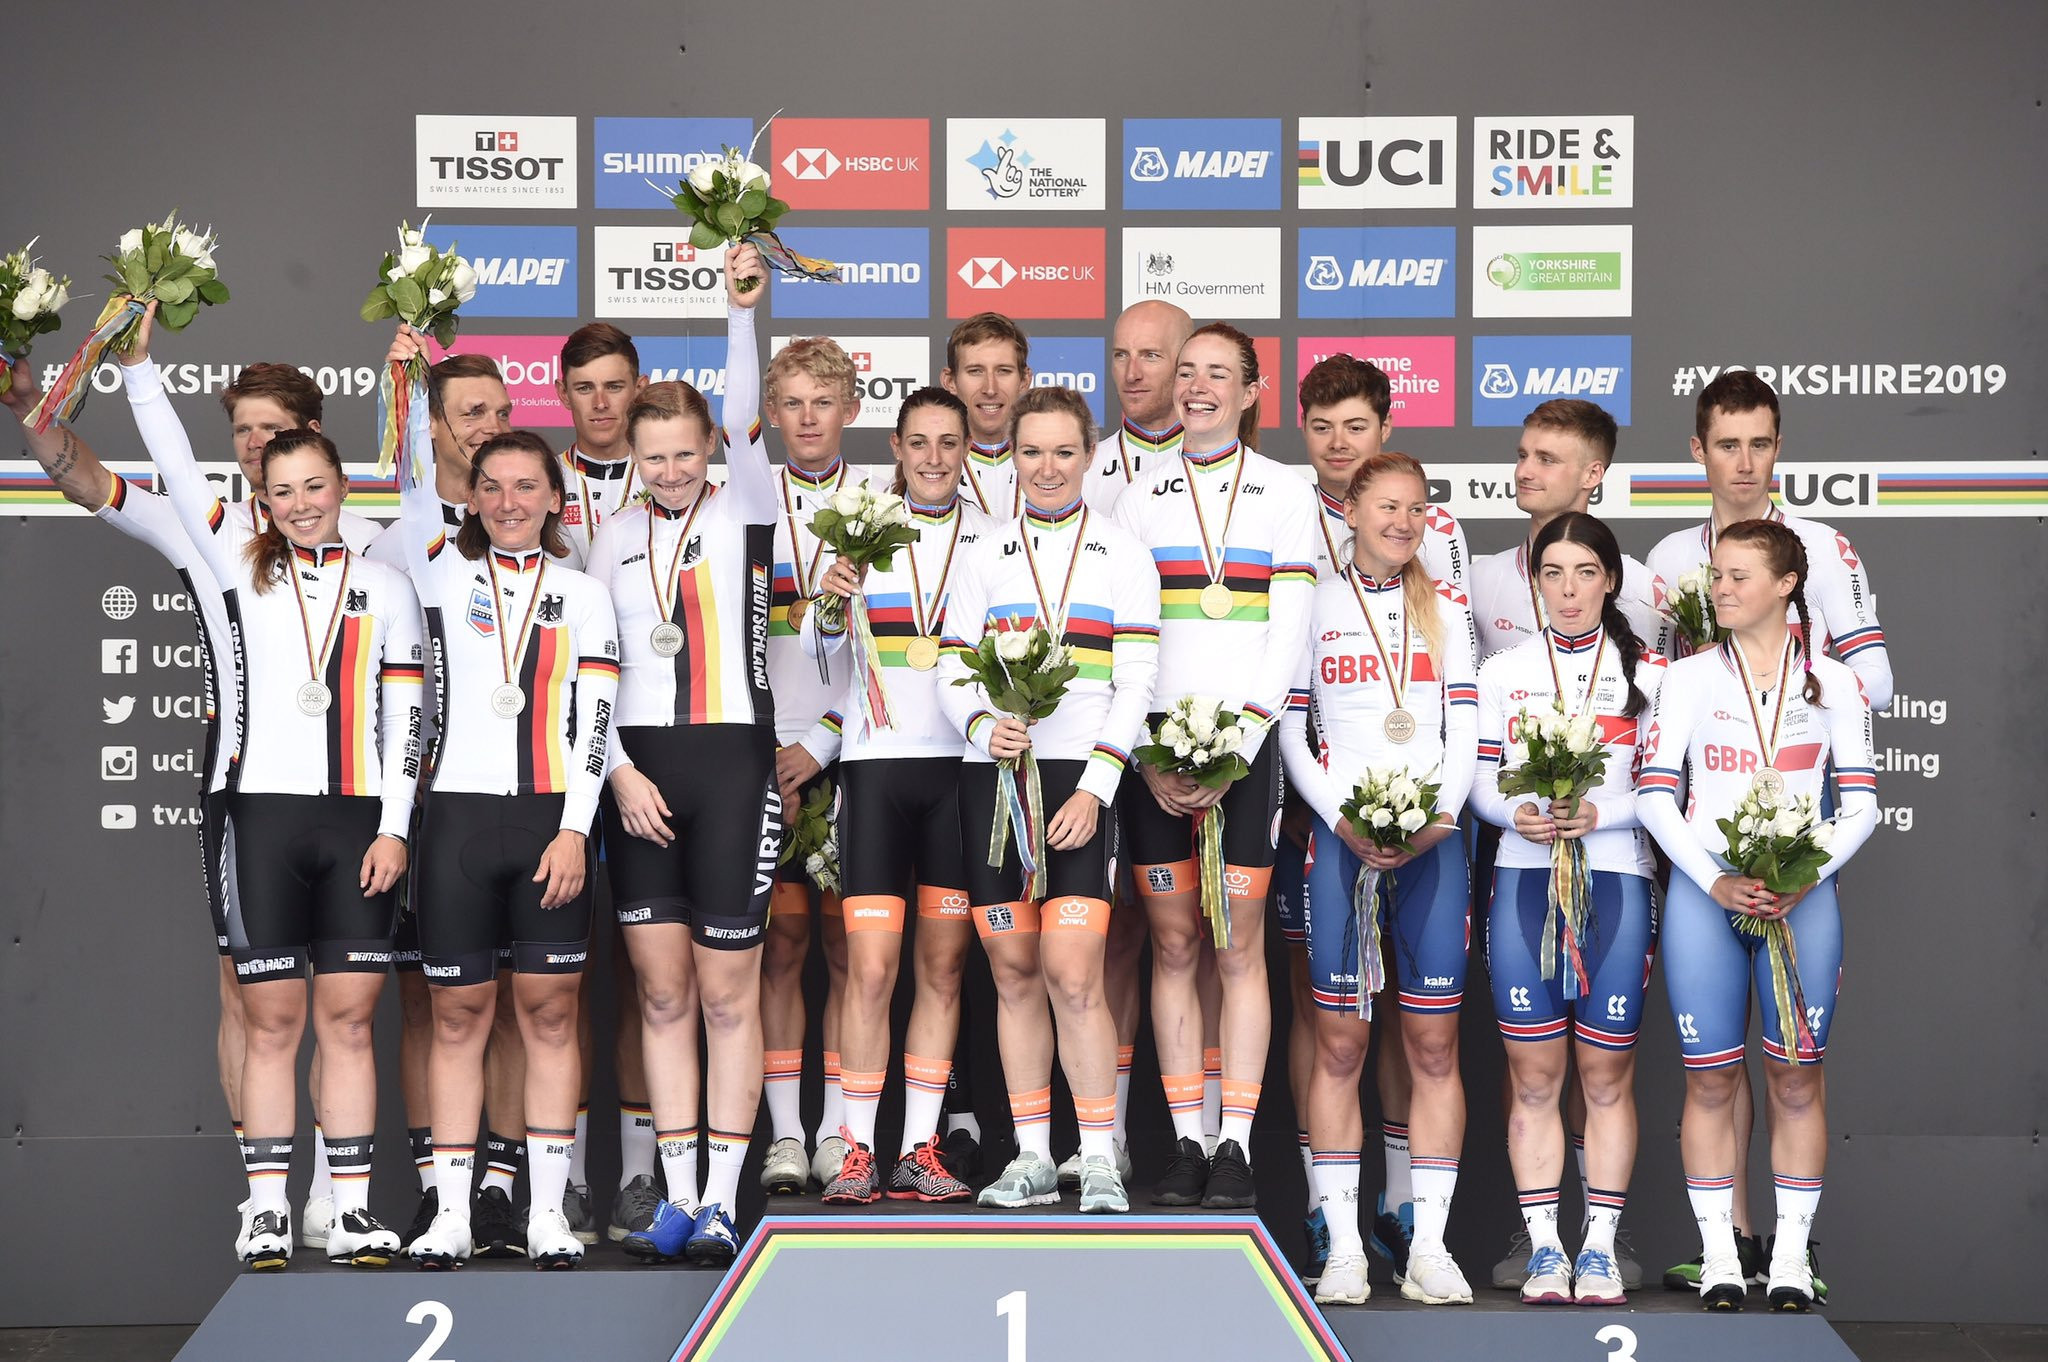 The Netherlands win mixed relay time trial to claim first gold medal of UCI Road World Championships